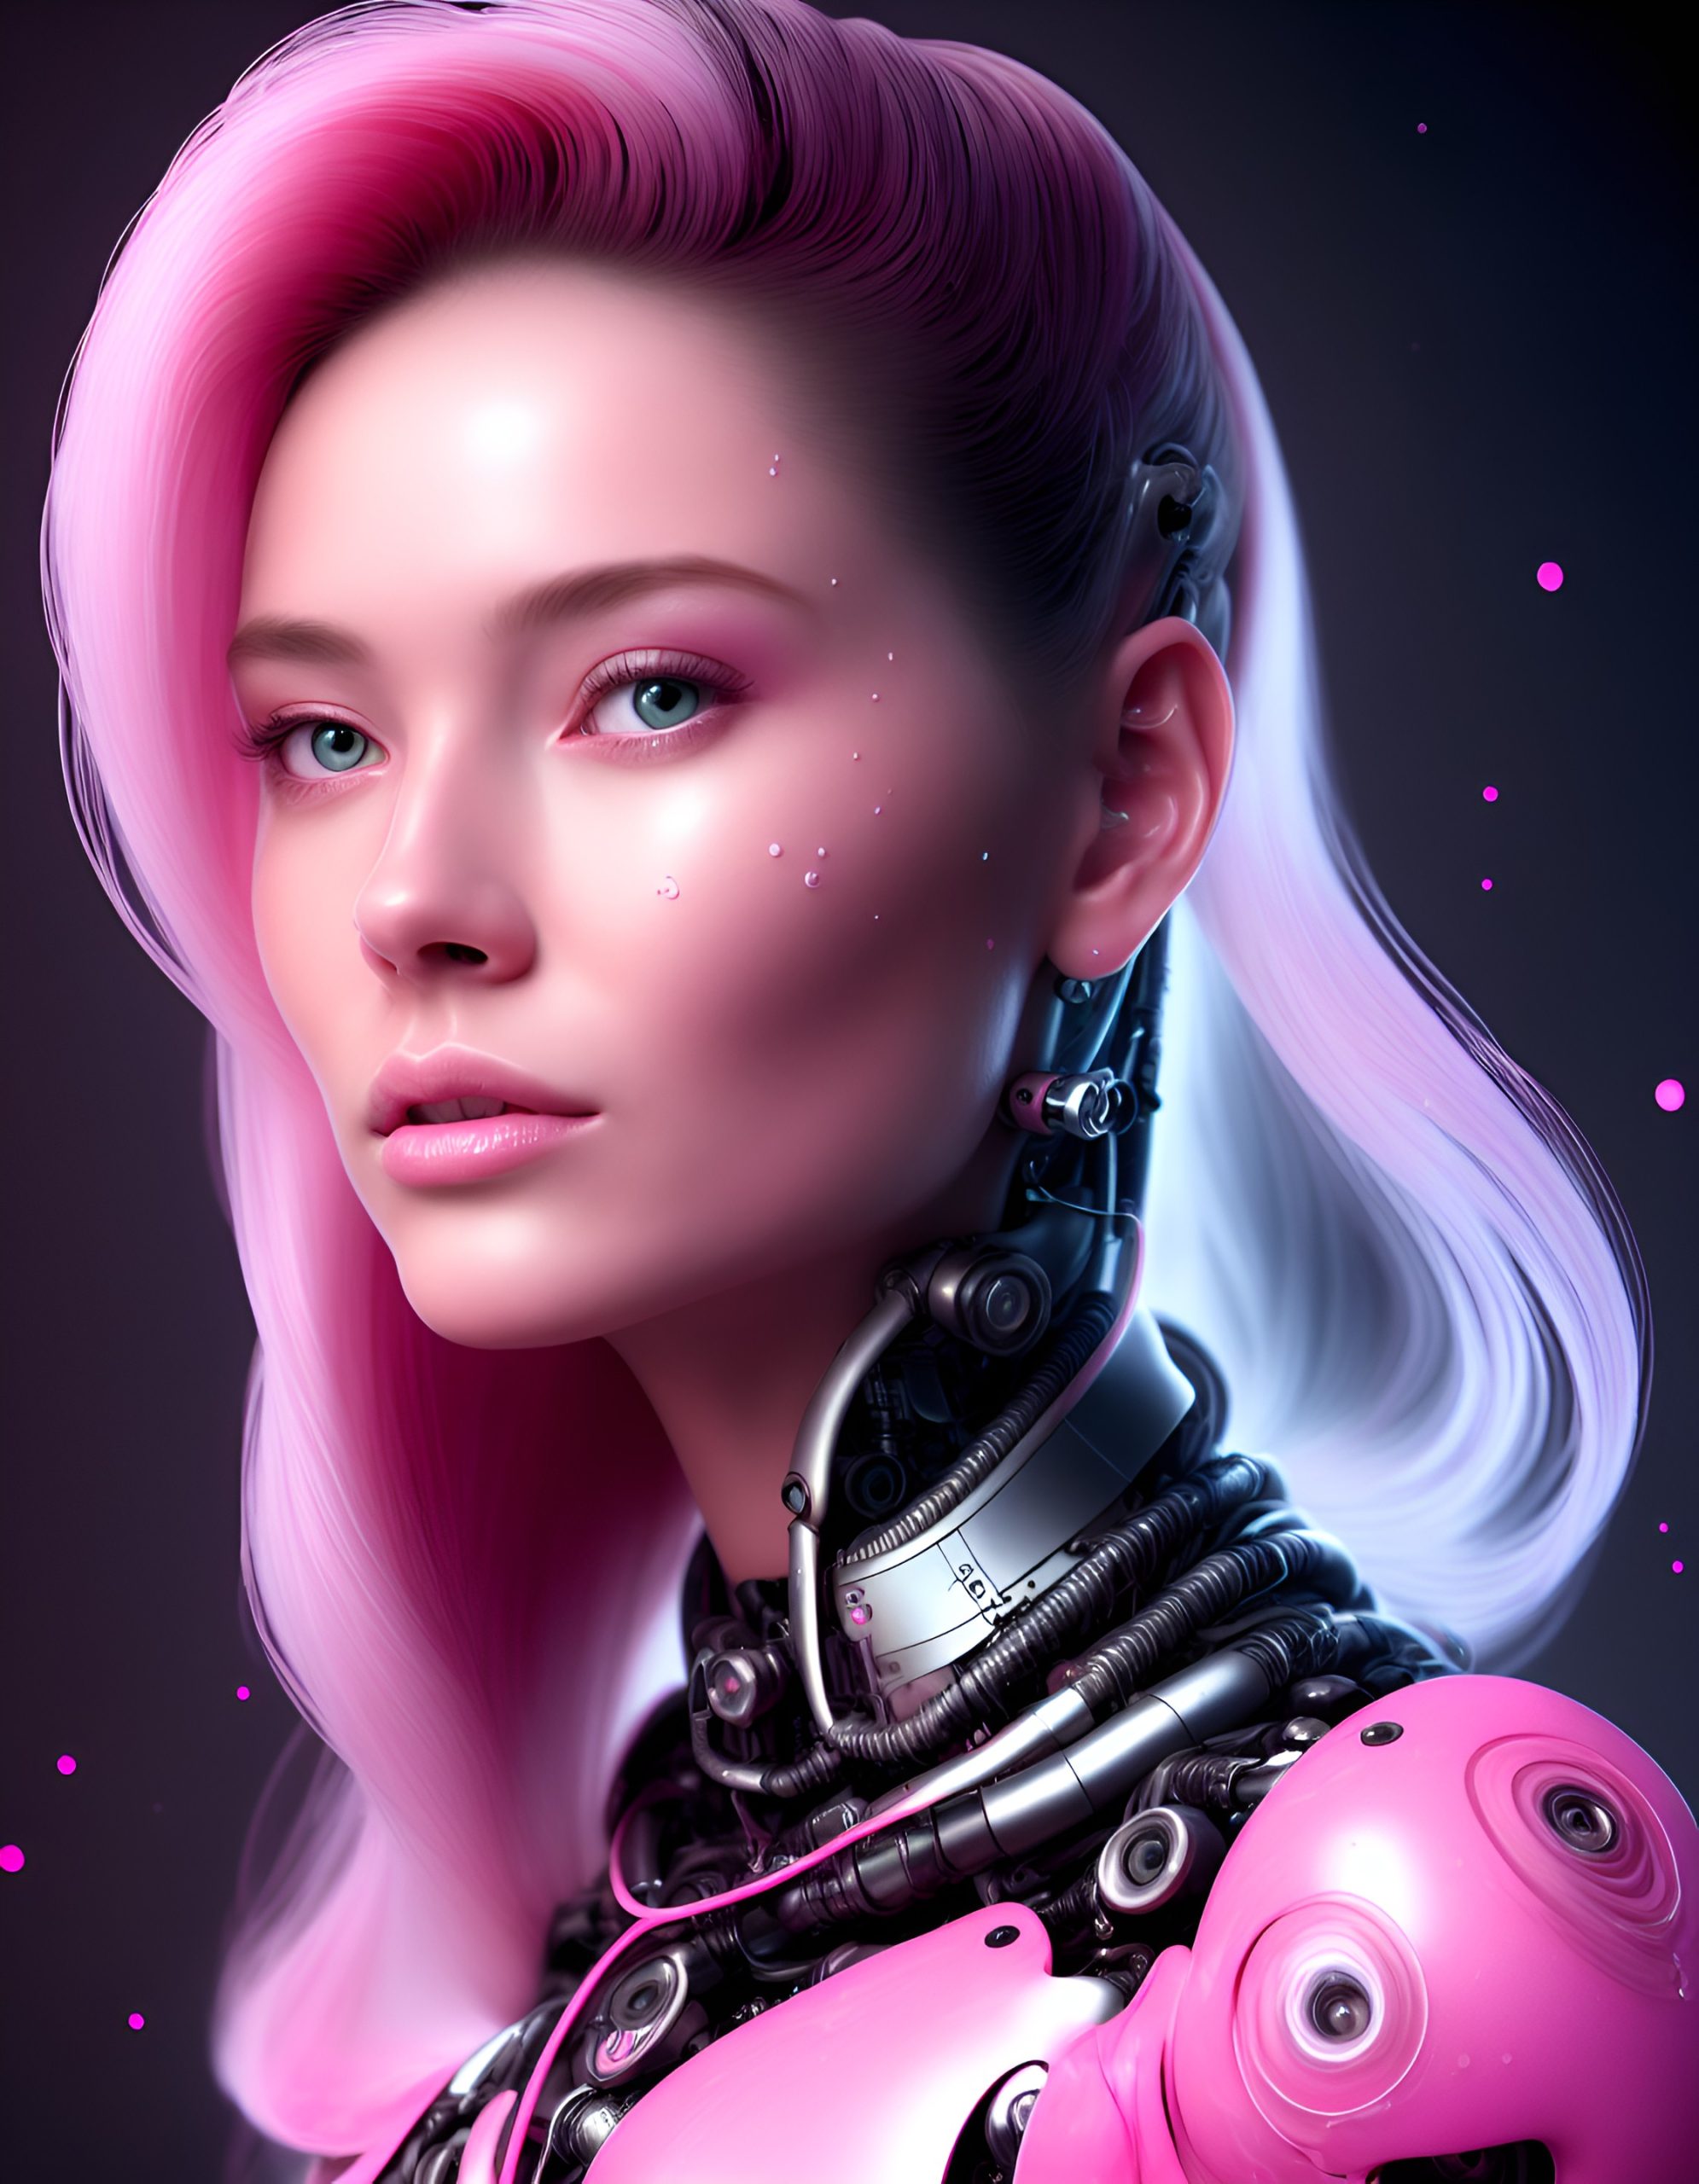 Default beautiful woman a cyborg woman 28years old pink gel lighting 2 e273b72d 23be 4b83 a482 894240f84e60 1 scaled